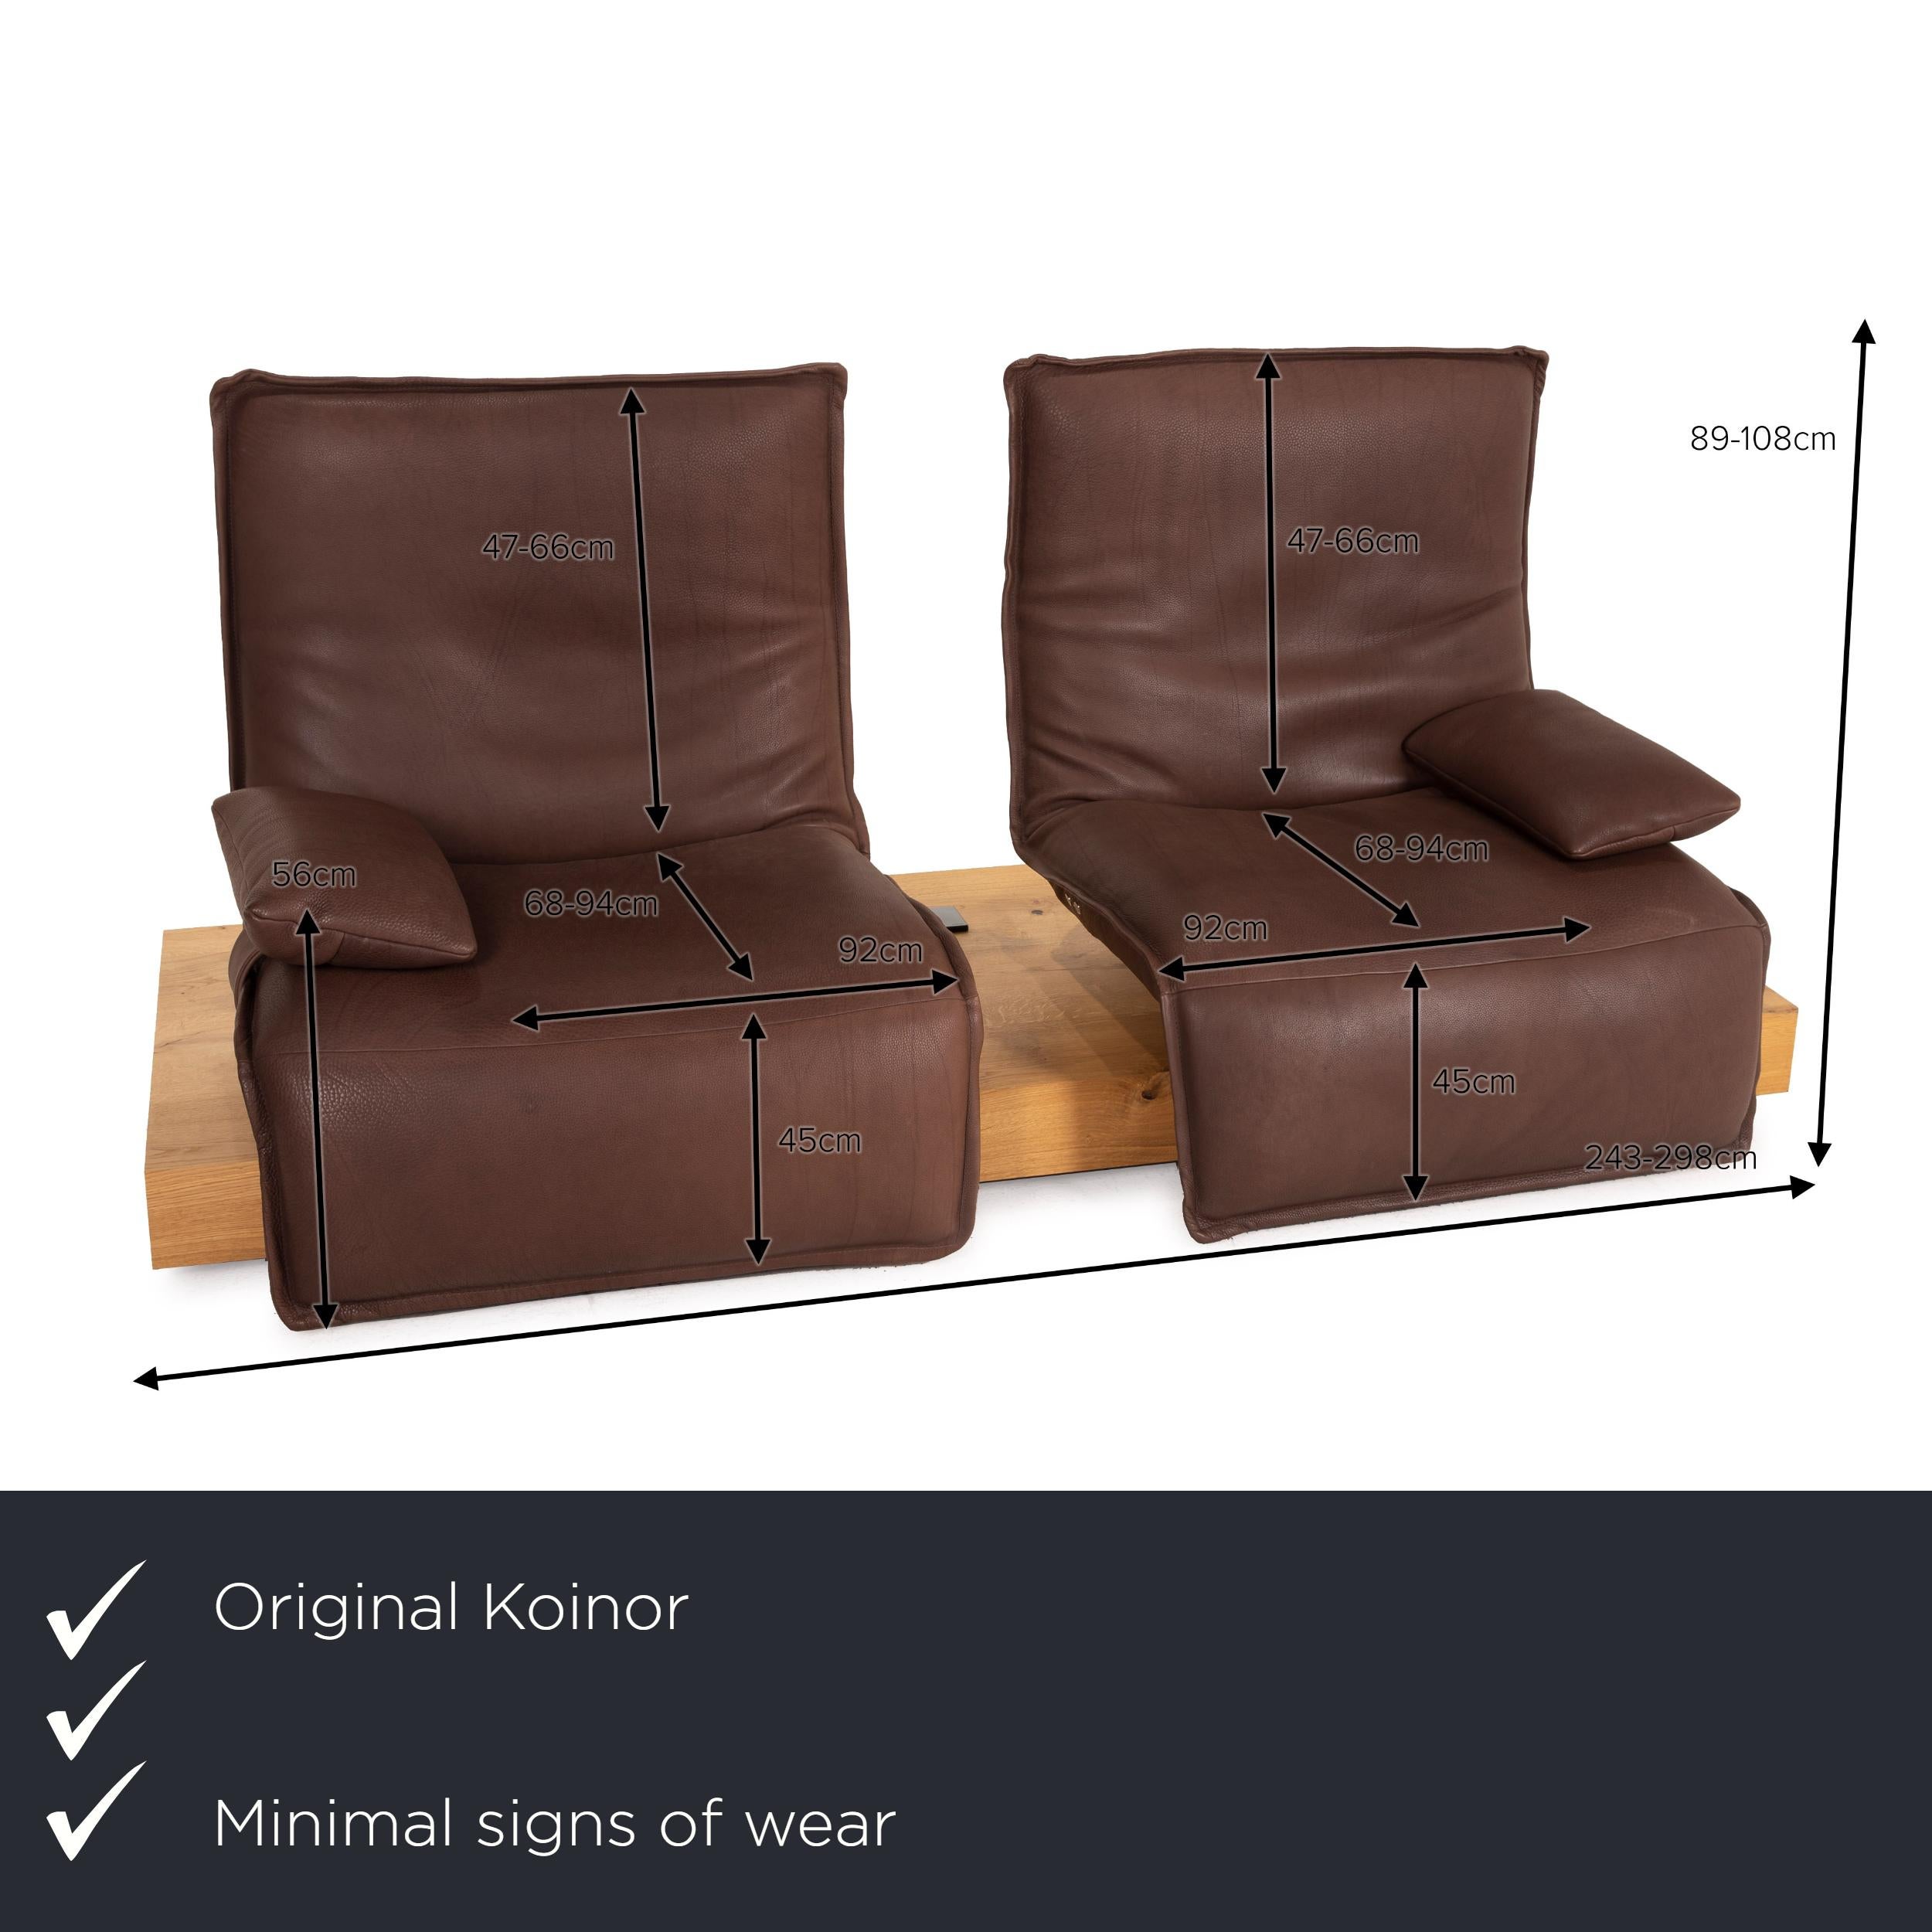 We present to you a Koinor Epos 3 leather sofa brown two-seater wood couch with electrical function.
 
 

 Product measurements in centimeters:
 

 depth: 108
 width: 243
 height: 89
 seat height: 45
 rest height: 56
 seat depth: 68
